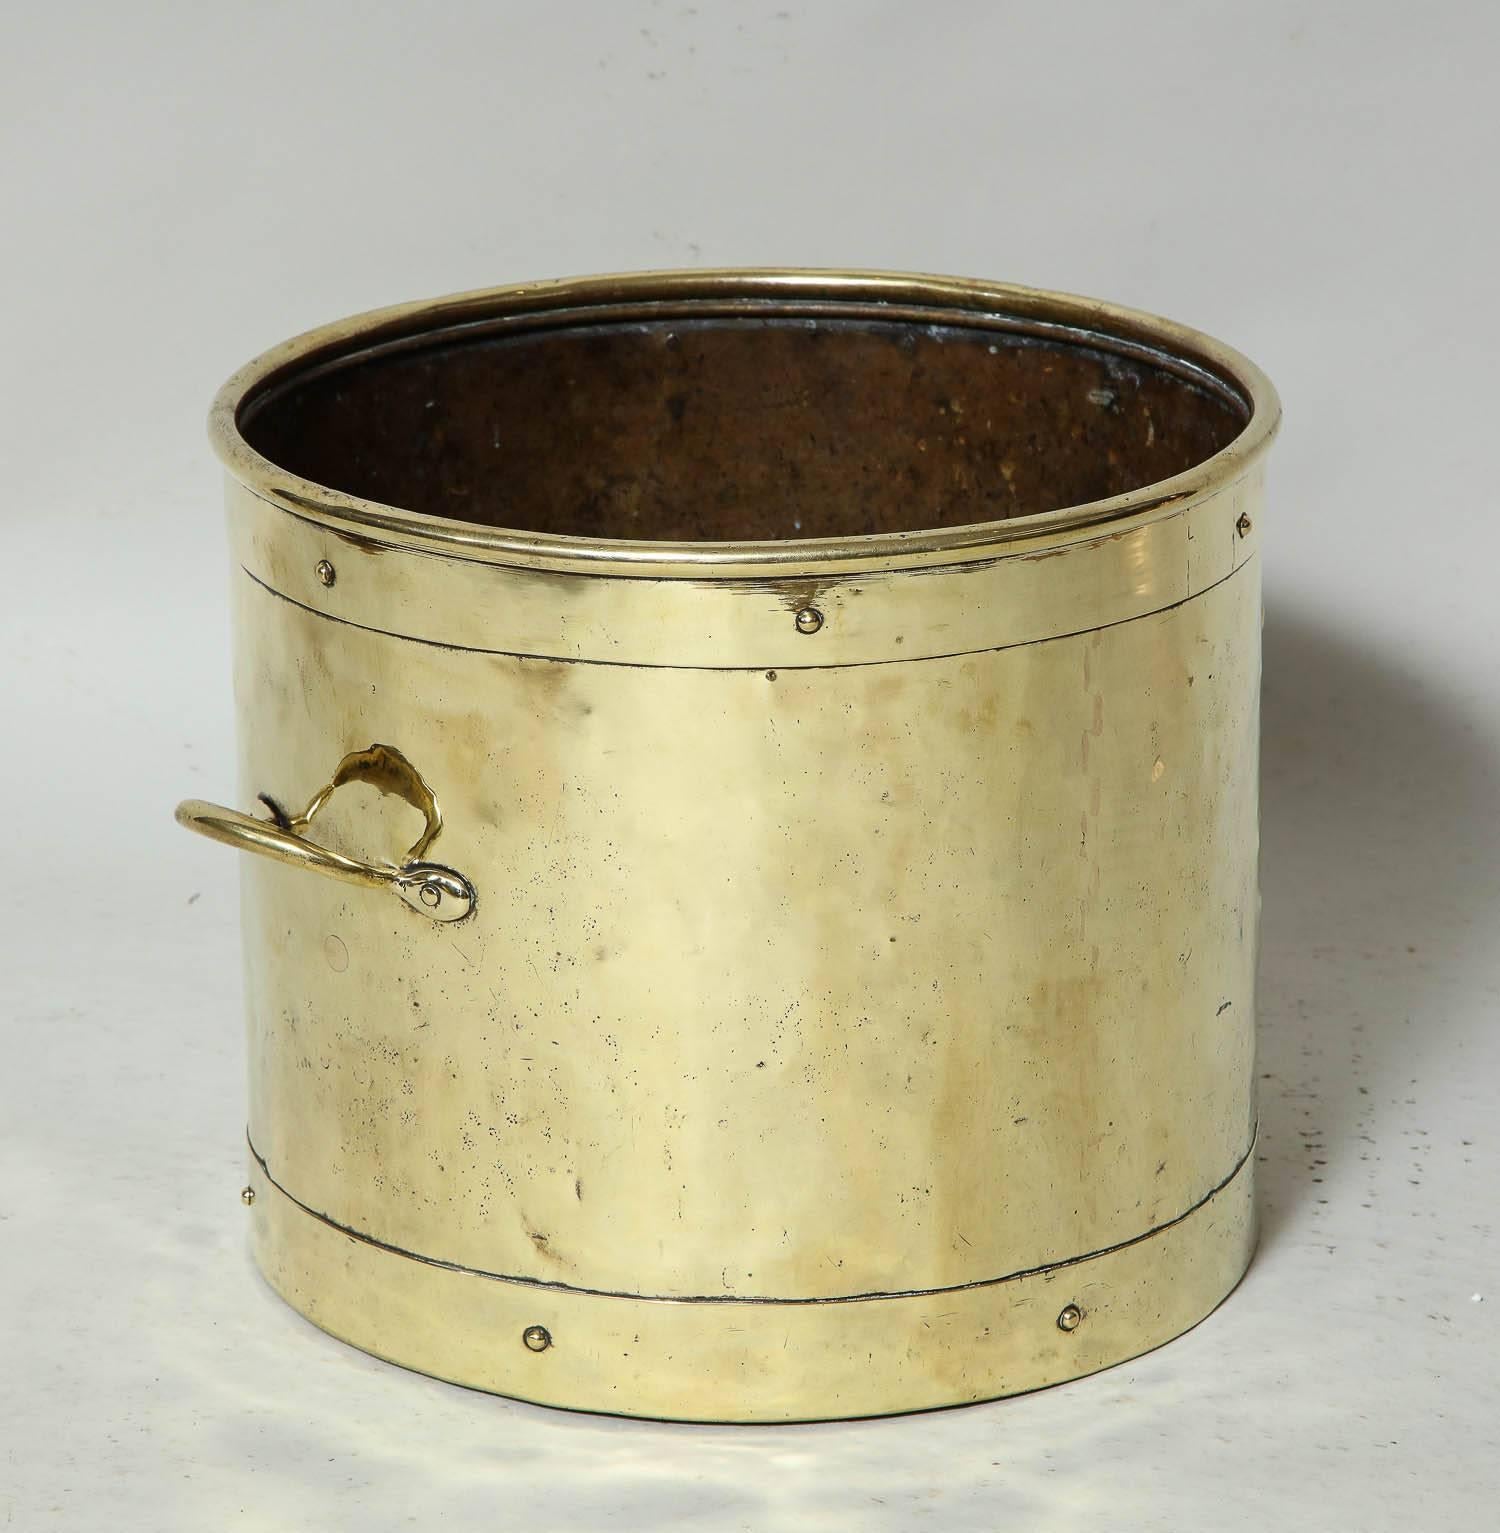 Good 19th century English kindling bin in brass with rolled rim and brass riveted bands, and two brass carrying handles.  Useful next to a fireplace for kindling.
